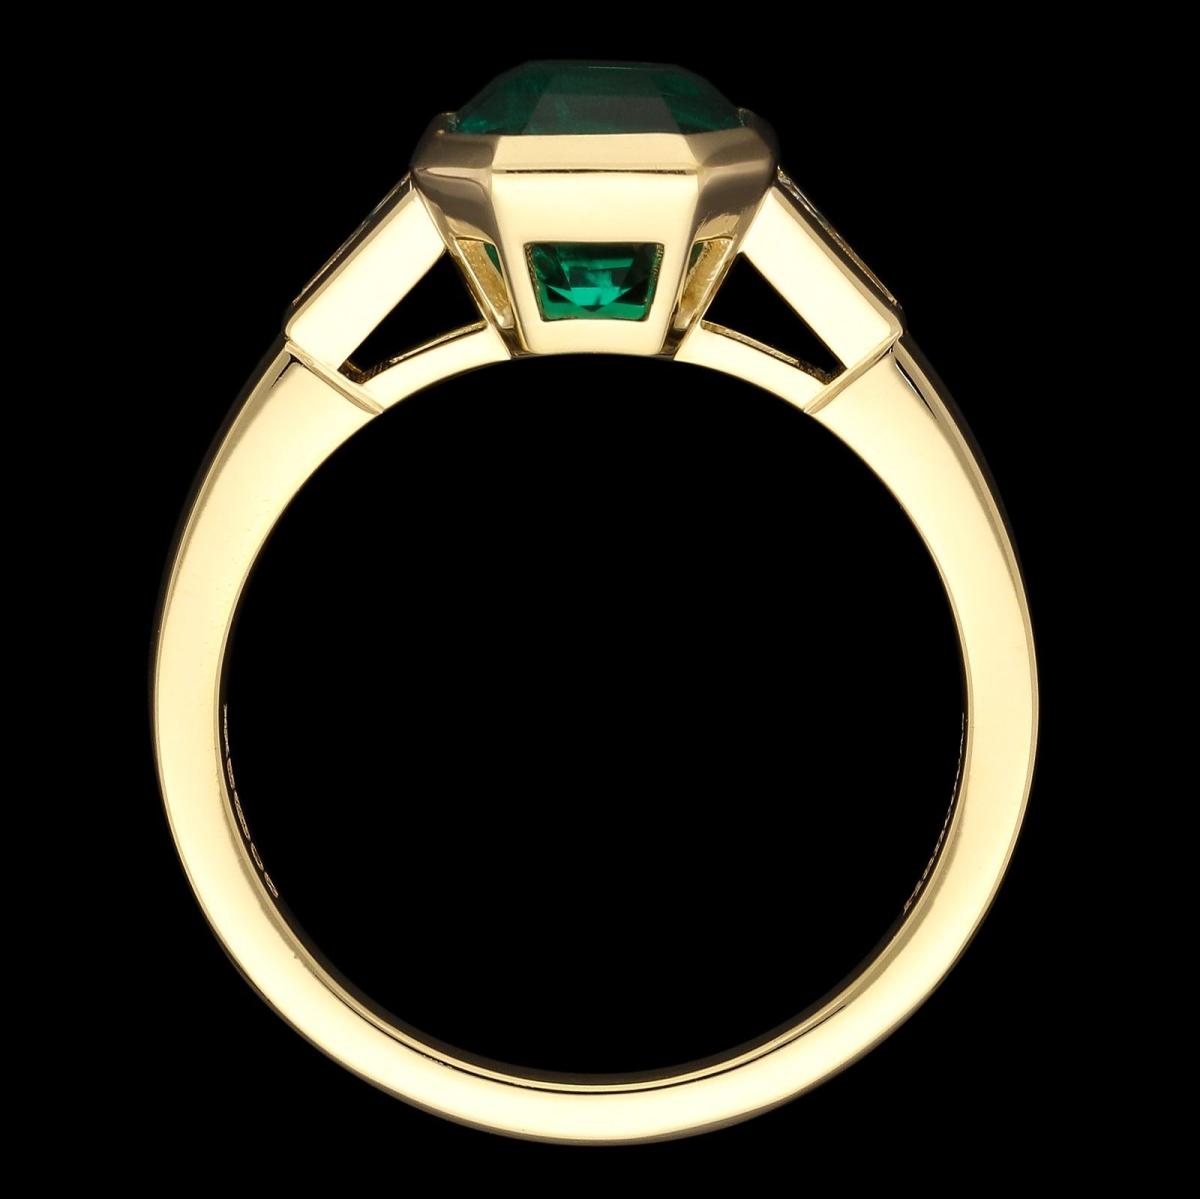 Hancocks 1.83ct Colombian Emerald Ring In 18ct Gold With Tapered Baguette Diamond Shoulders